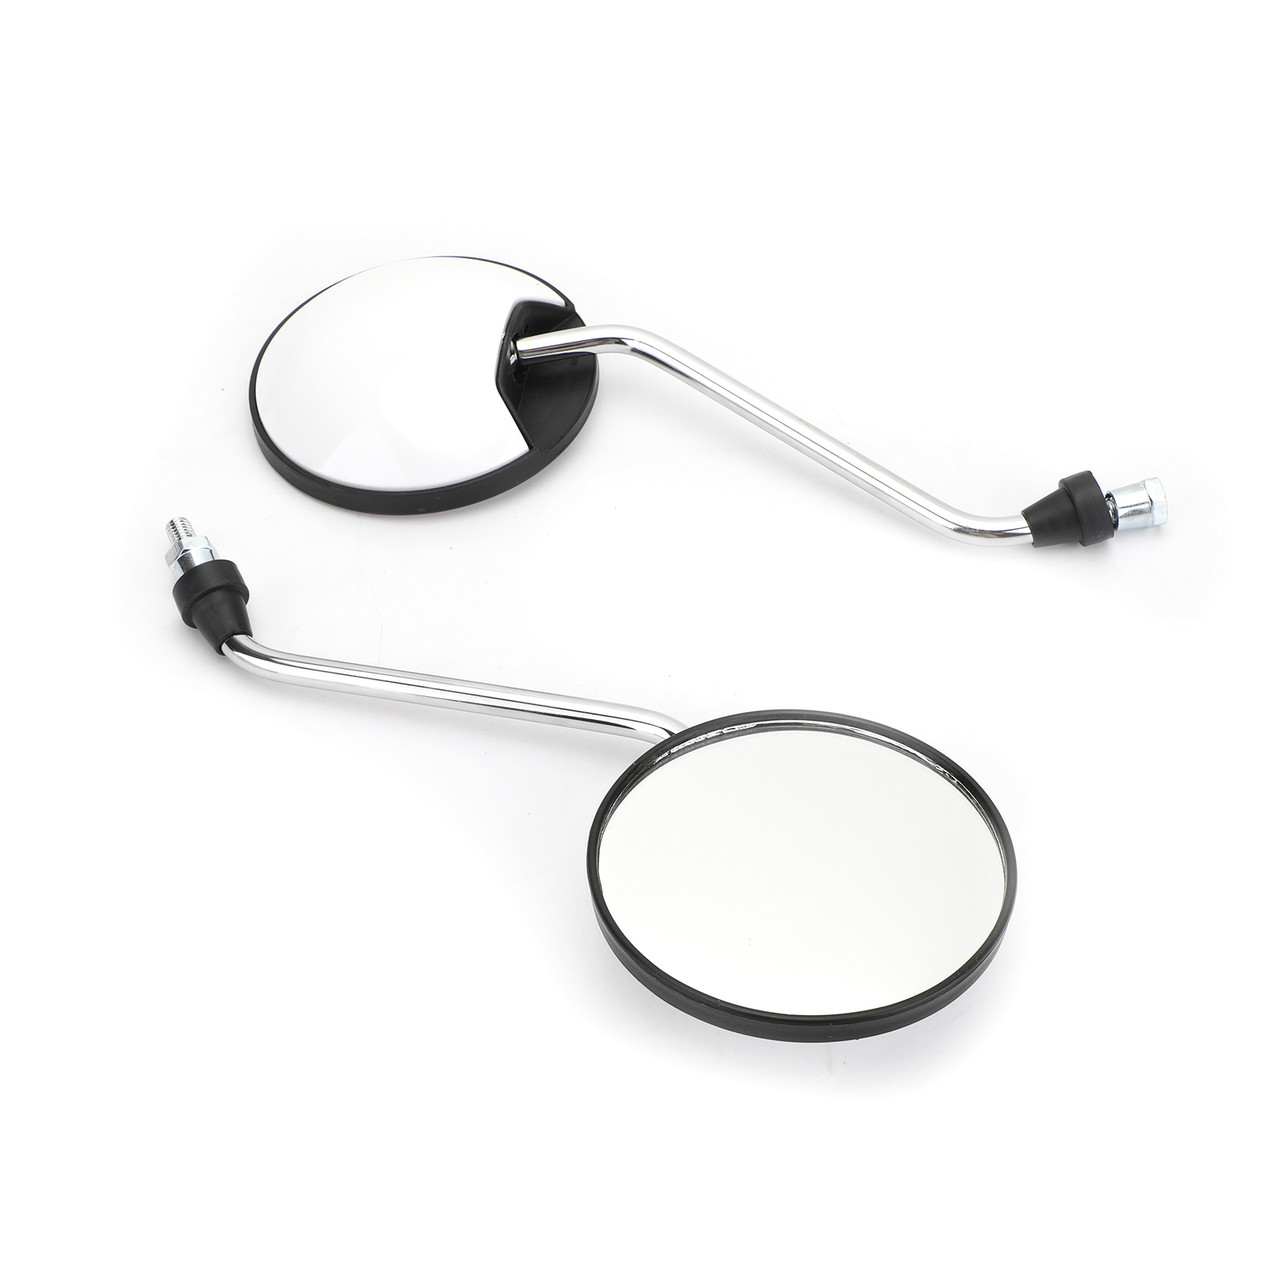 Pair 8mm Rearview Mirrors fits for Suzuki Scooter Motorcycle Moped Bike ATV with 8MM threads White~BC1